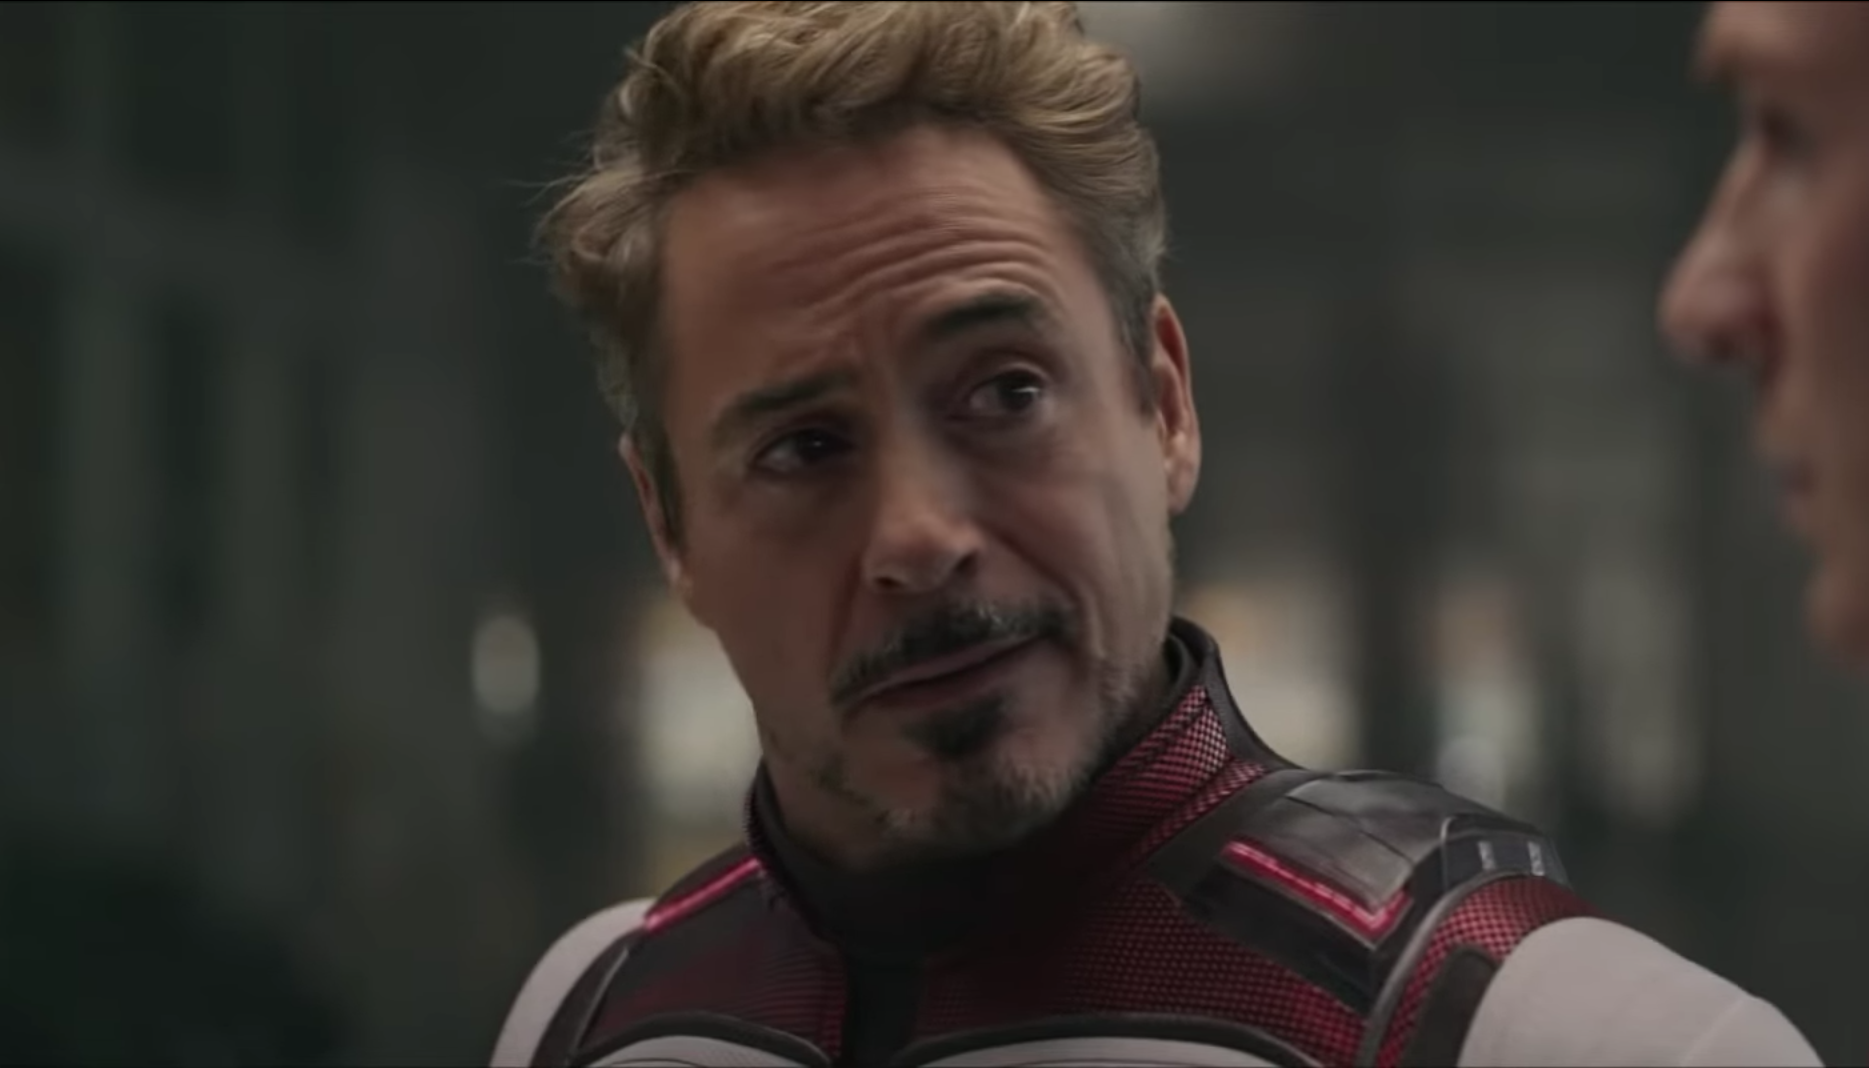 Avengers: Endgame': Behind Tony Stark's 'I Am Iron Man' Moment | IndieWire